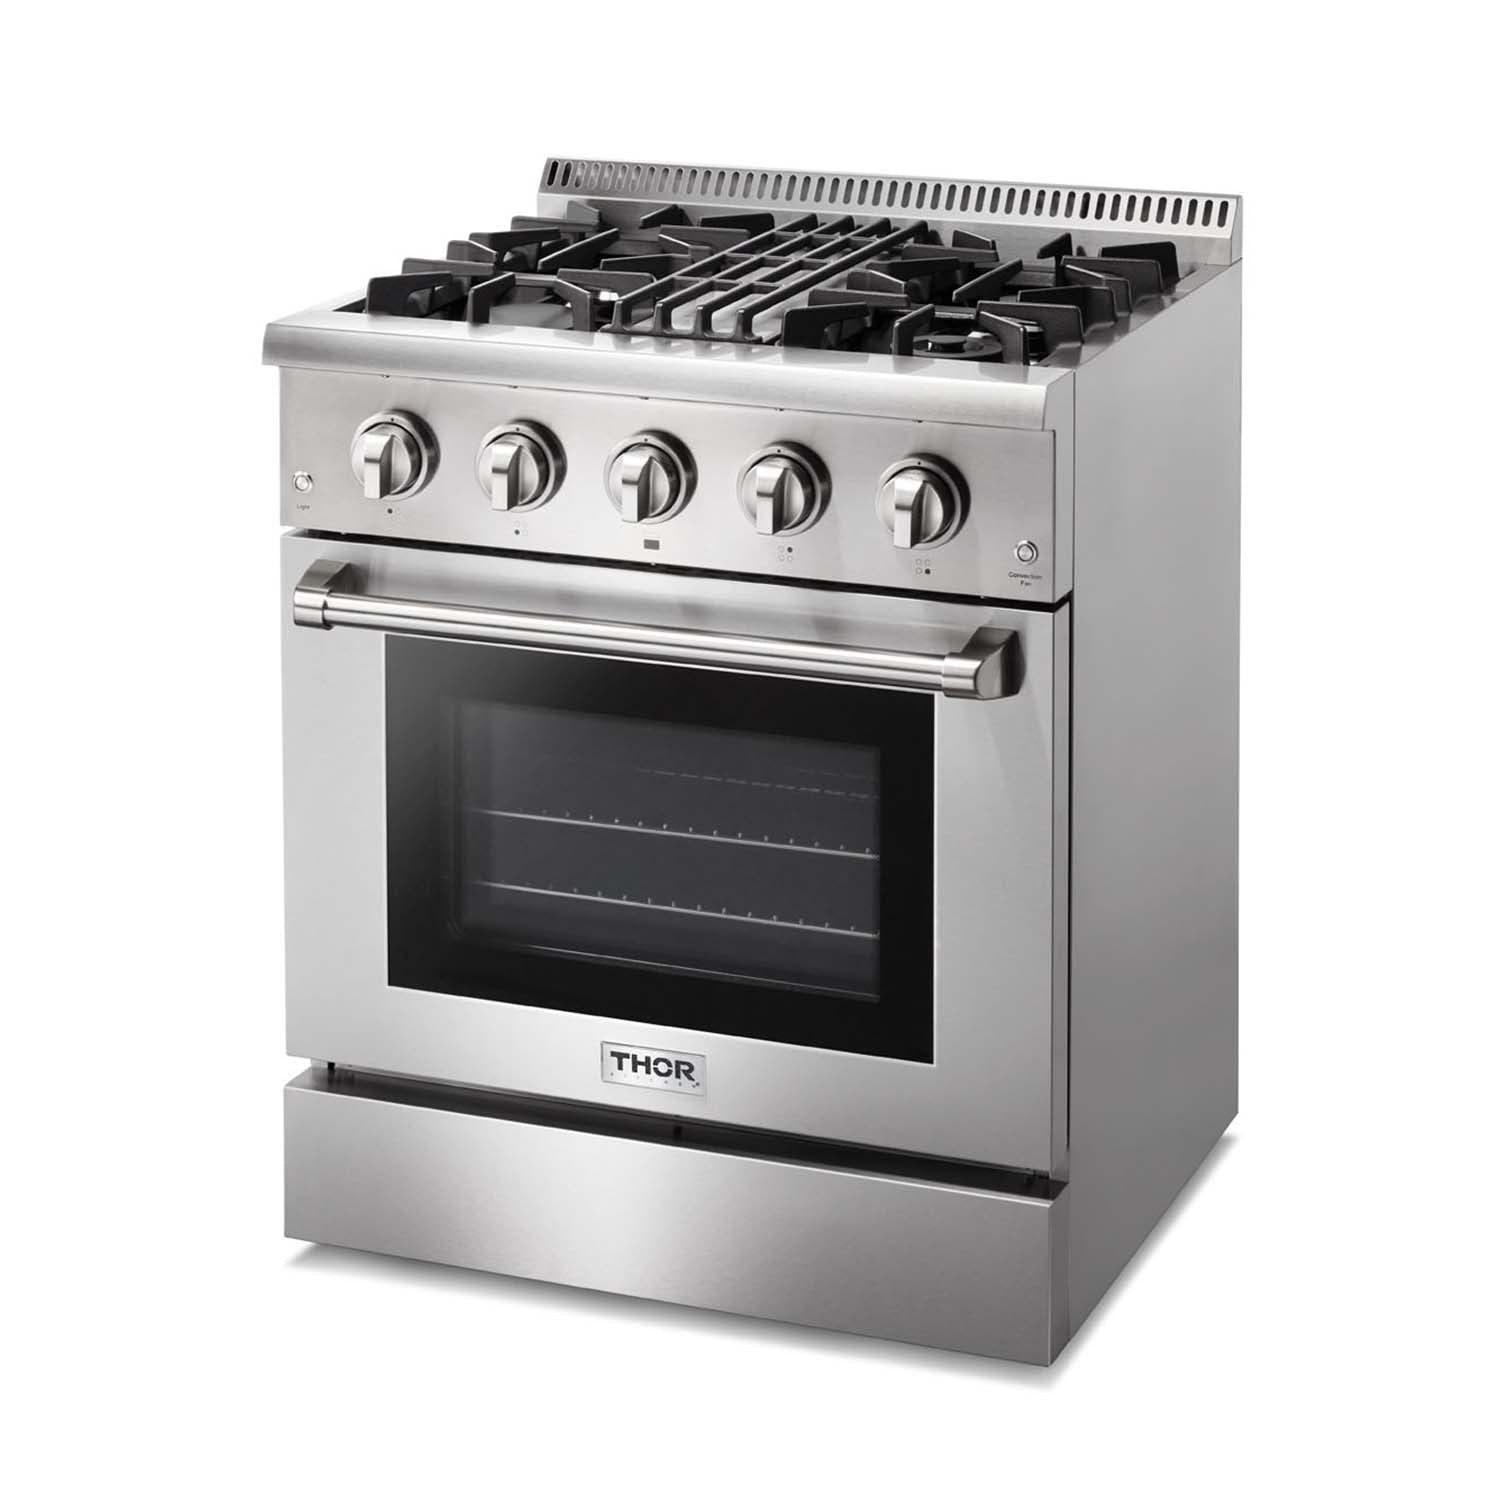 Thor Kitchen Professional 30 Inch Dual Fuel Range in Stainless Steel - Model HRD3088U